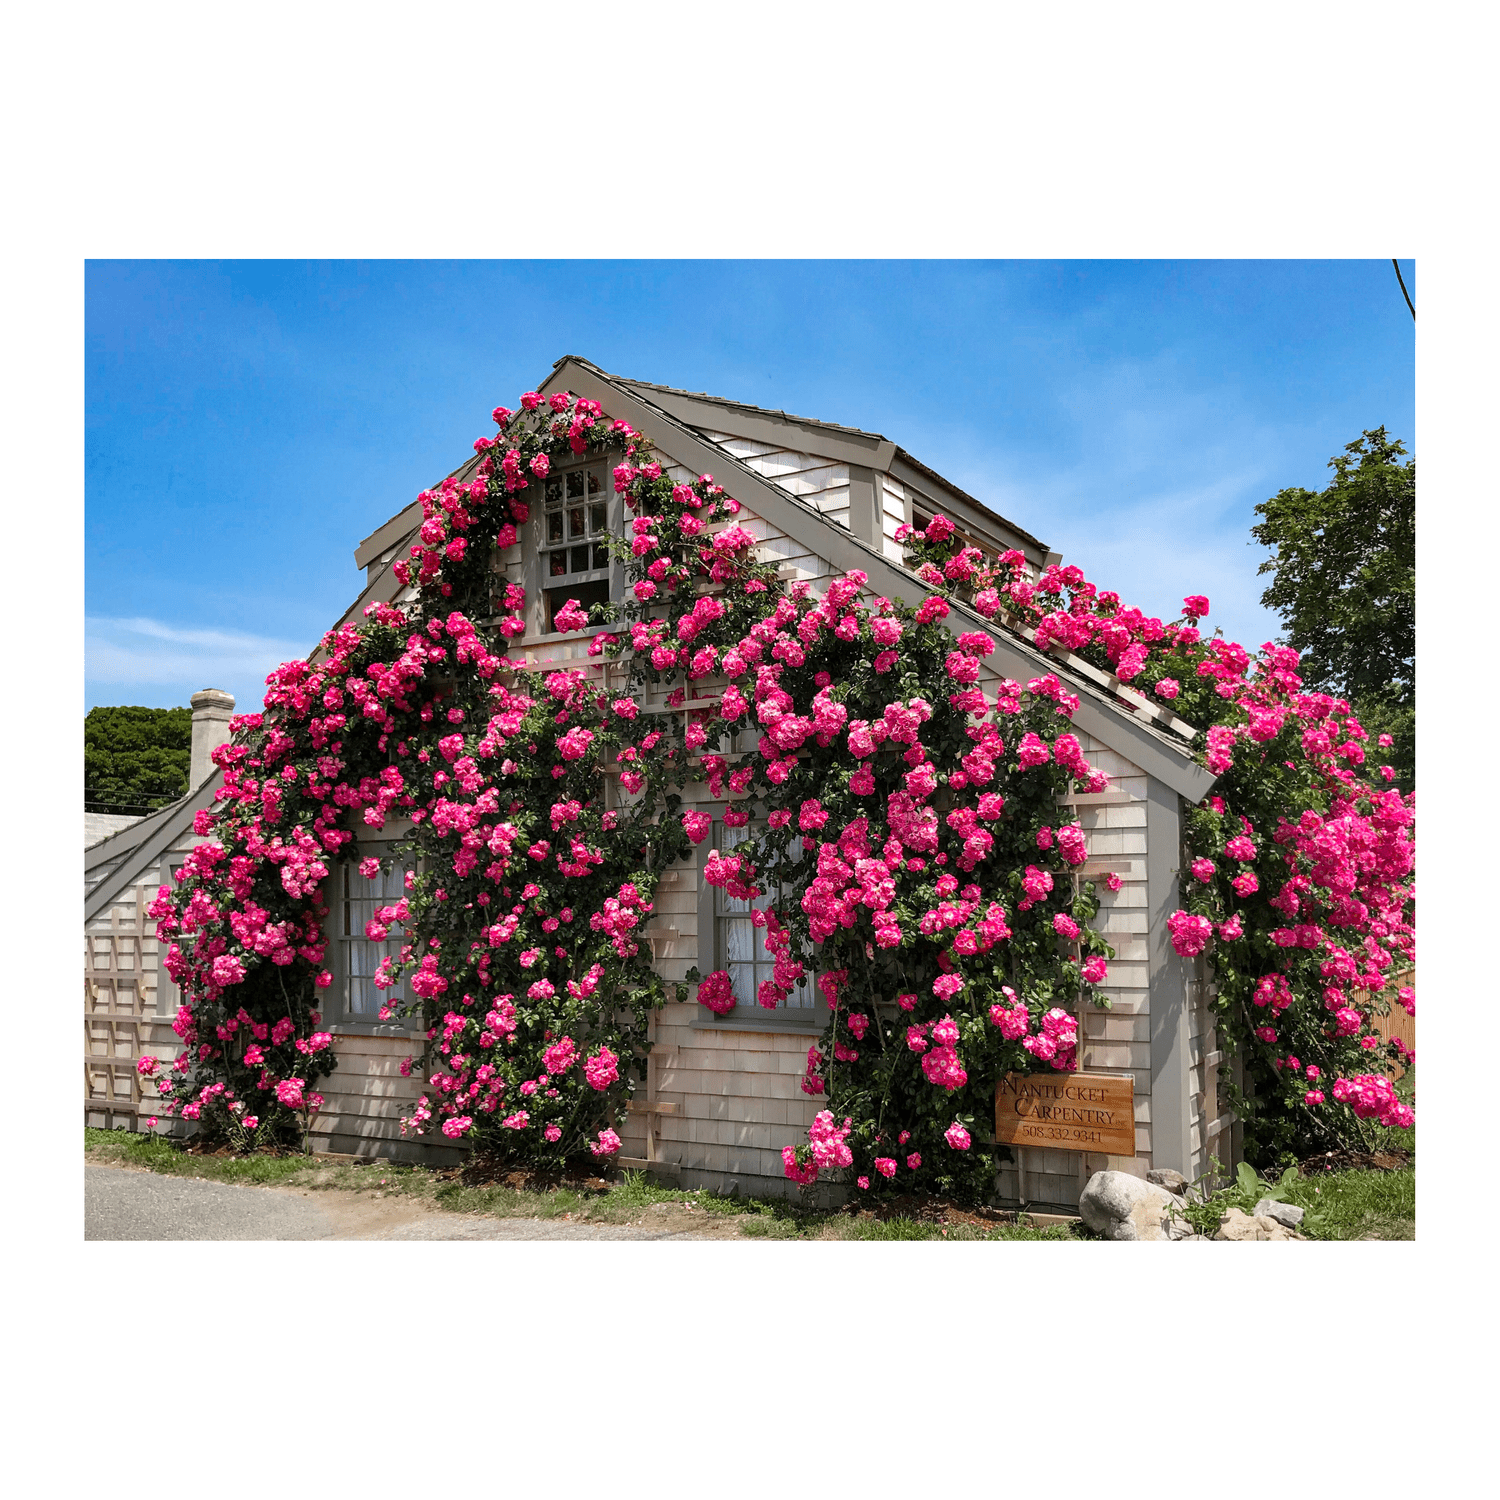 Sconset Rose Cottage Collection – Classic – Landscape / 16×20 (Print Only)